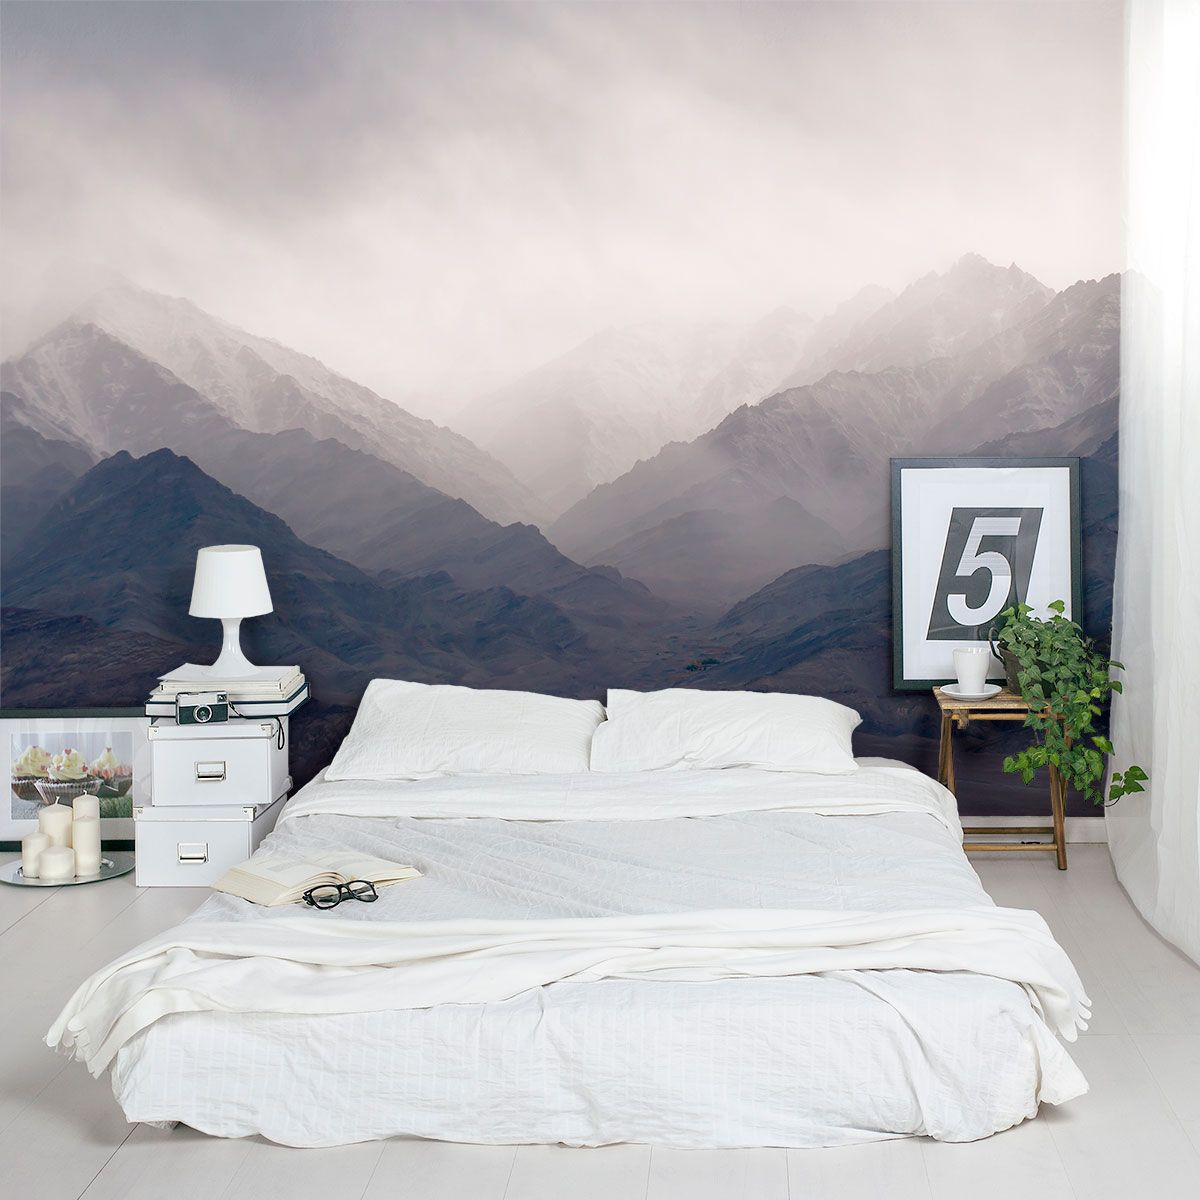 Wall Mural Bedroom
 Misty Mountains Wall Mural